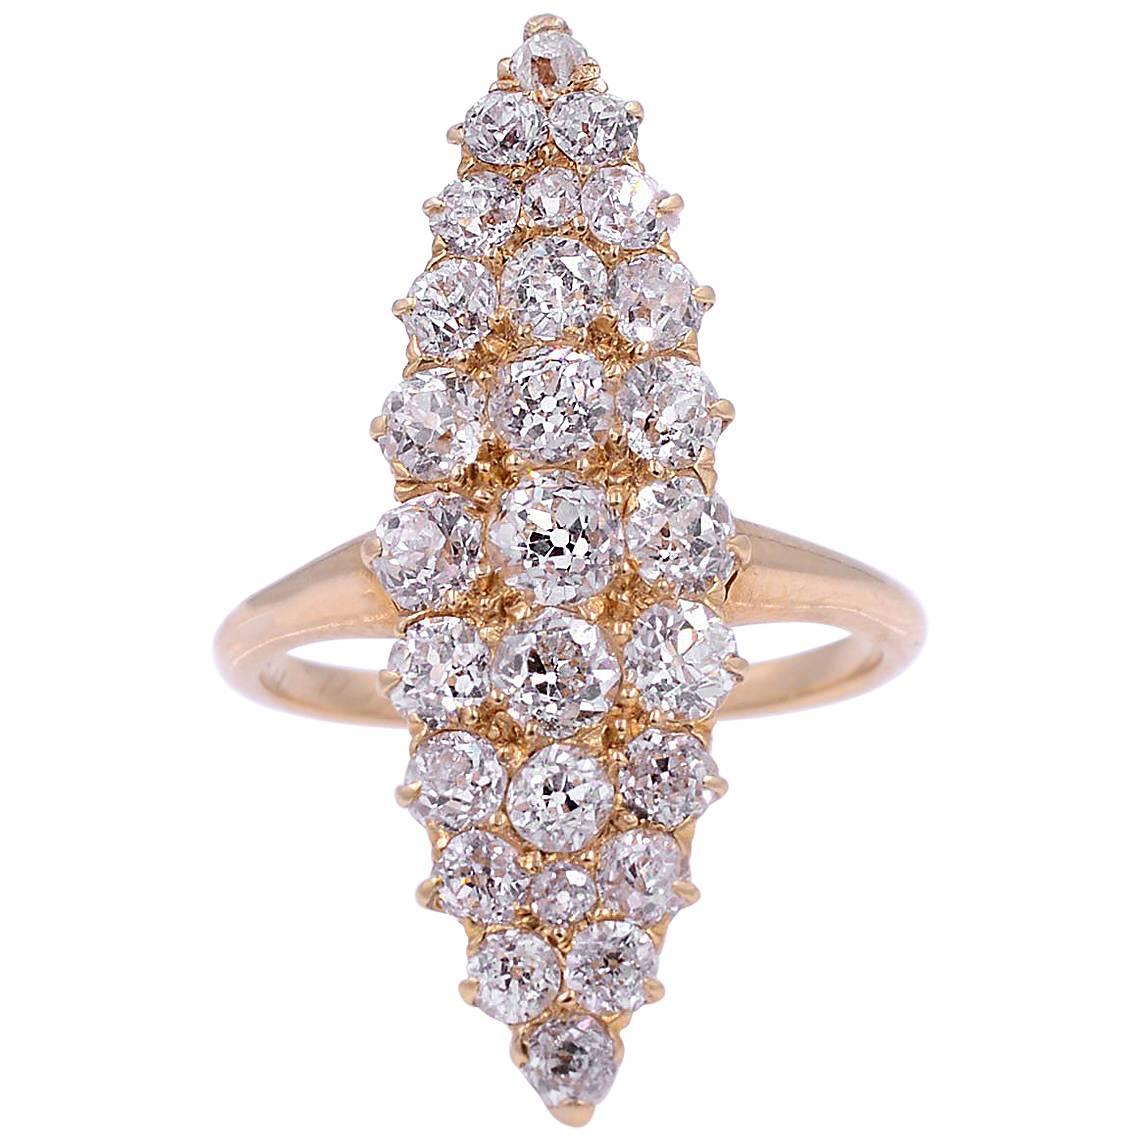 Old Mine Marquise Shape Cluster Diamond Ring 2.70 Carat